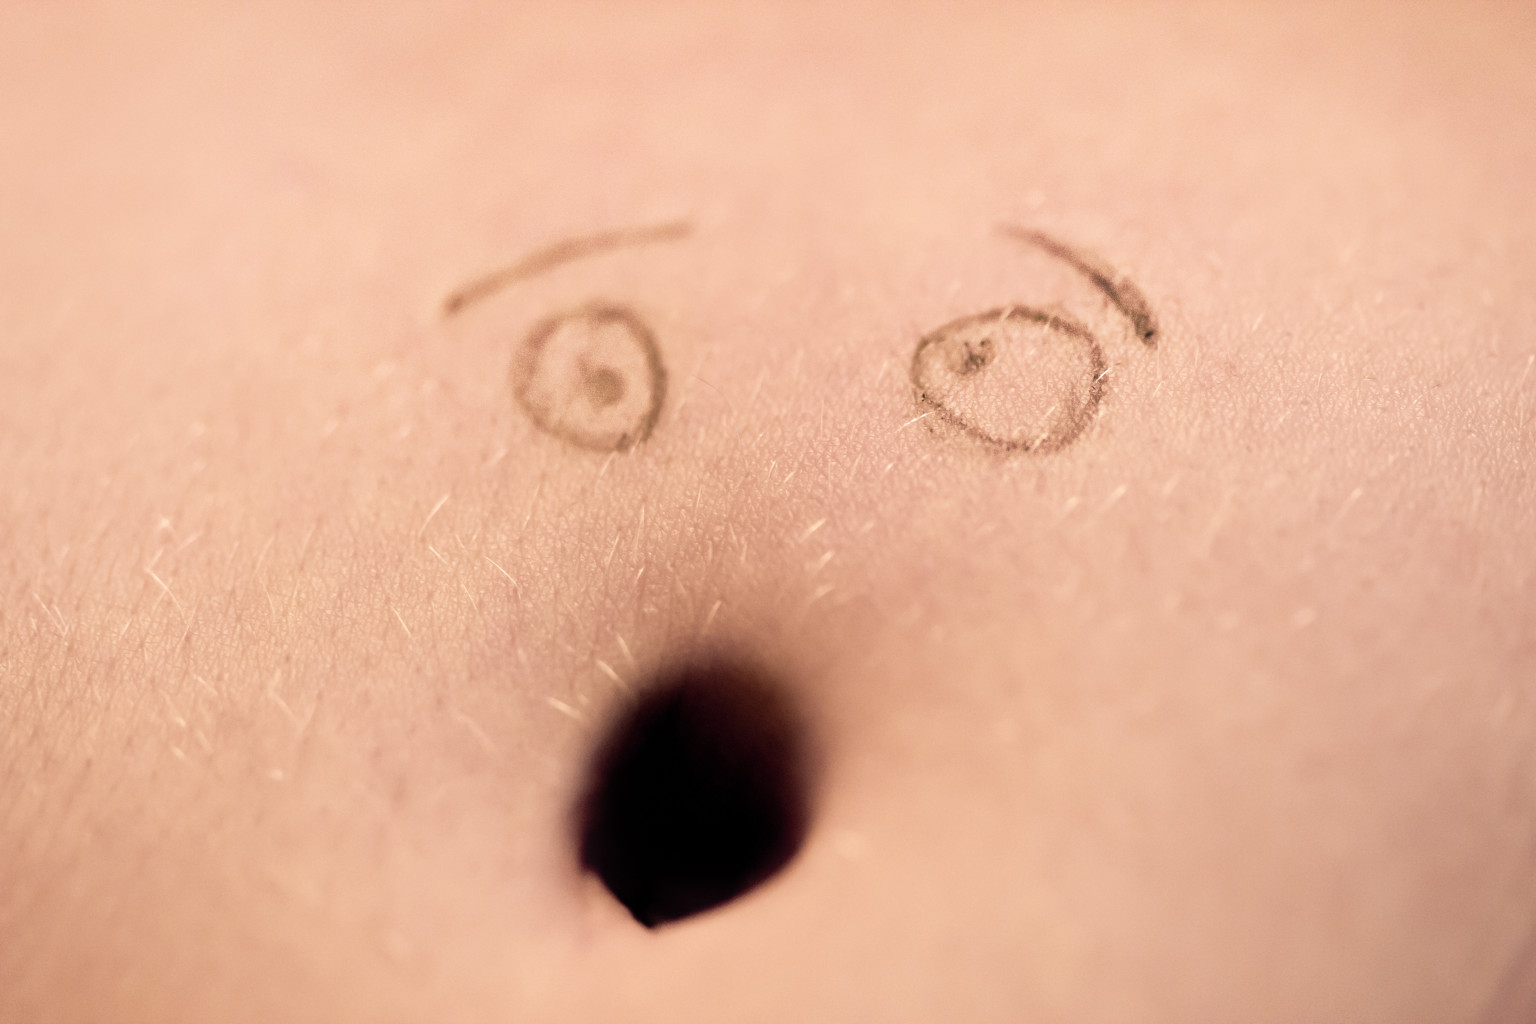 How can an outie belly button be turned into an innie?